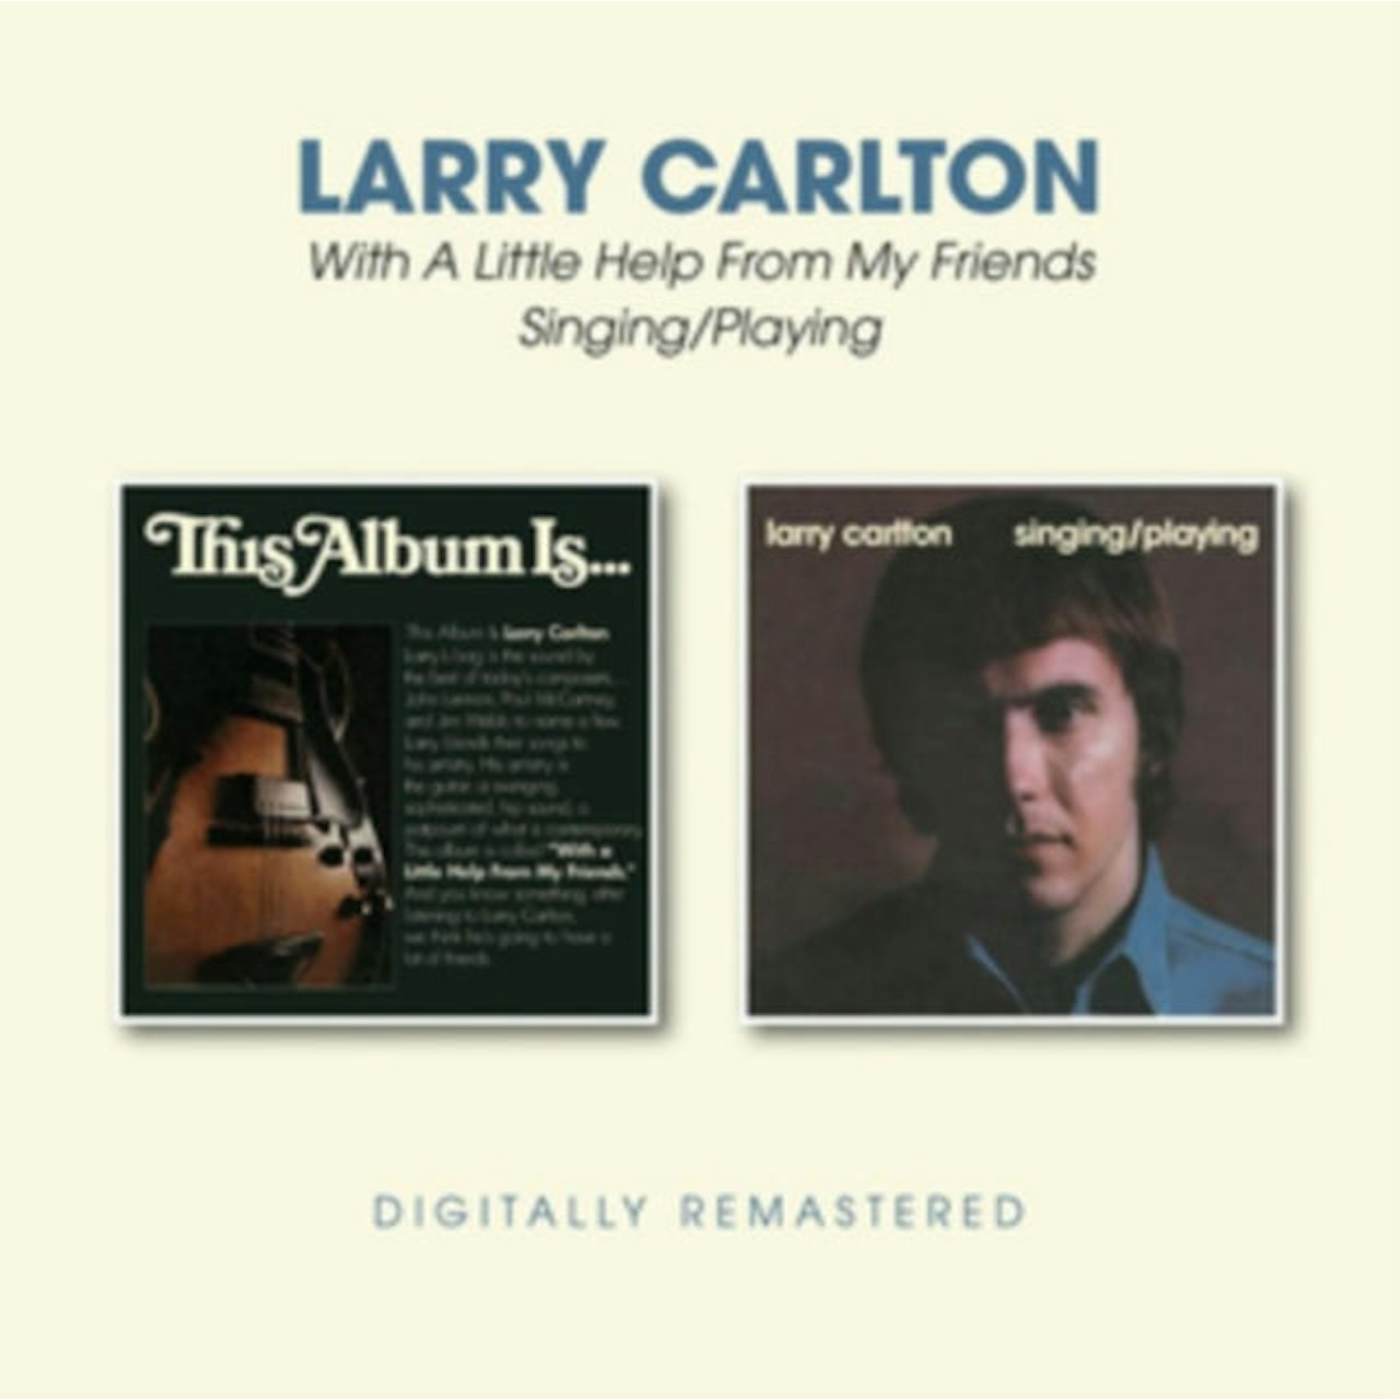 Larry Carlton CD - With A Little HeLP Vinyl Record From My Friends / Singing / Playing